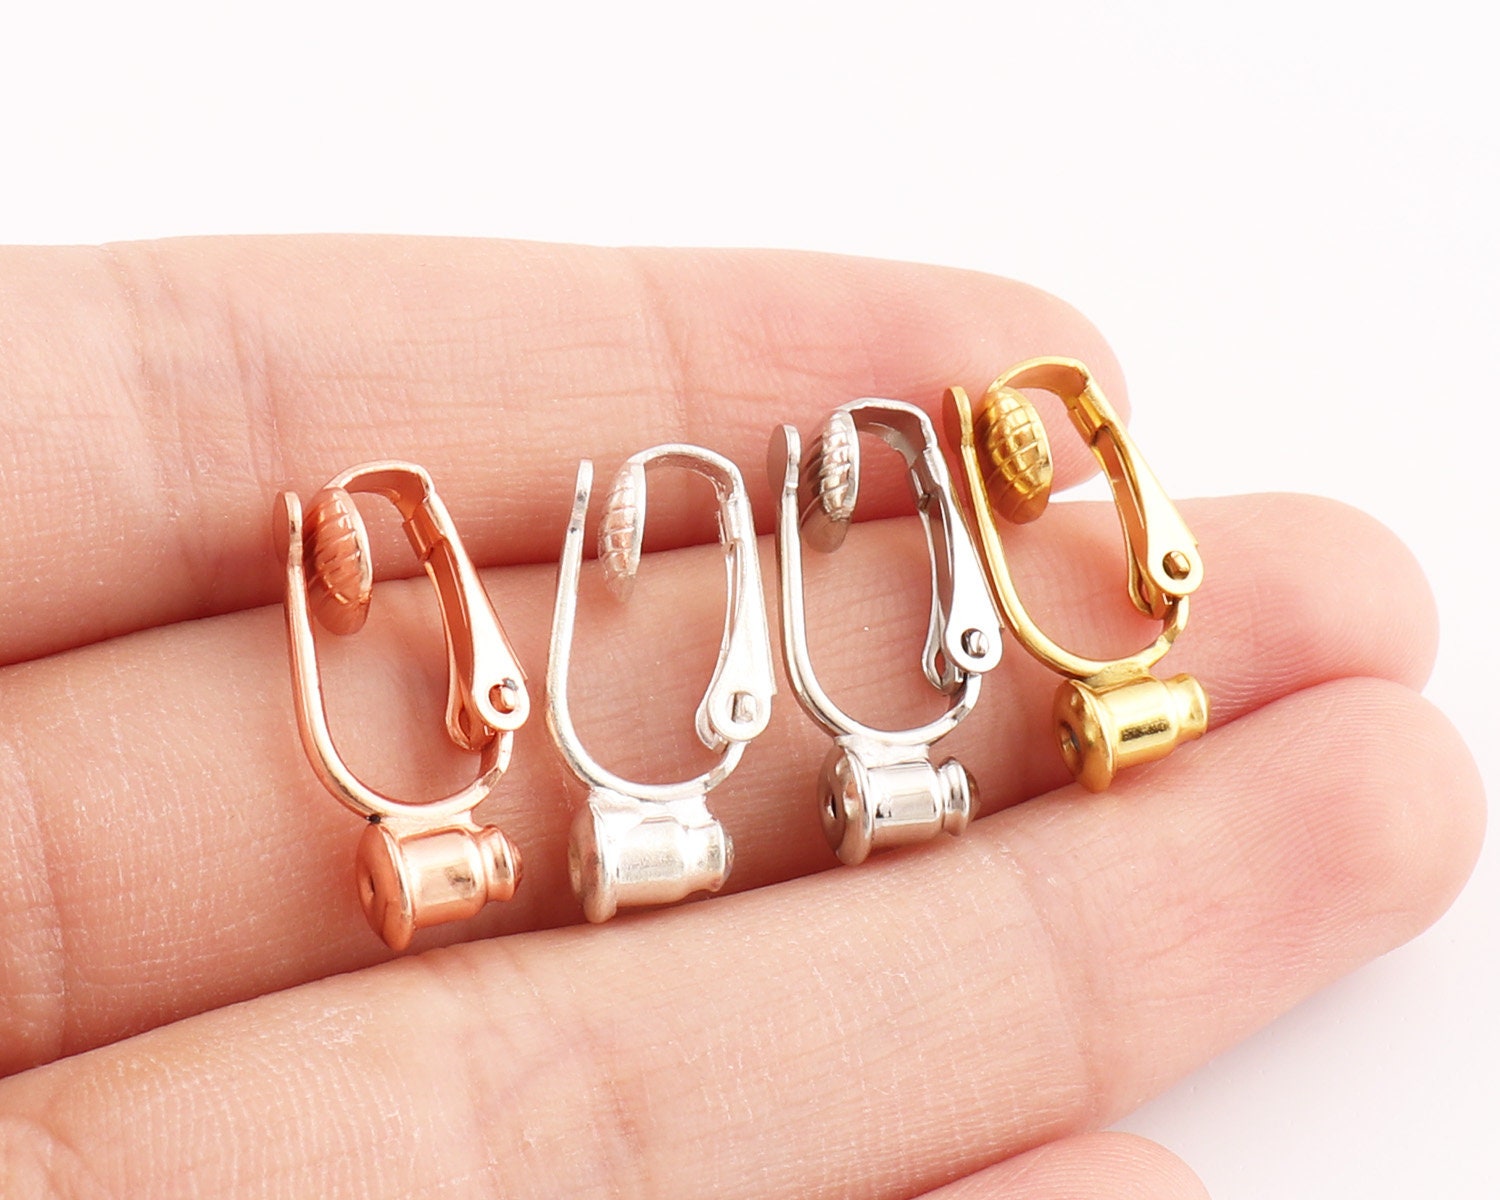 30pcs Earring Clip Backs Copper Clip-on Earring Converter Earring Pads  Hoops Ear Pins Components Findings with Post for Non-Pierced DIY Ears  Jewelry